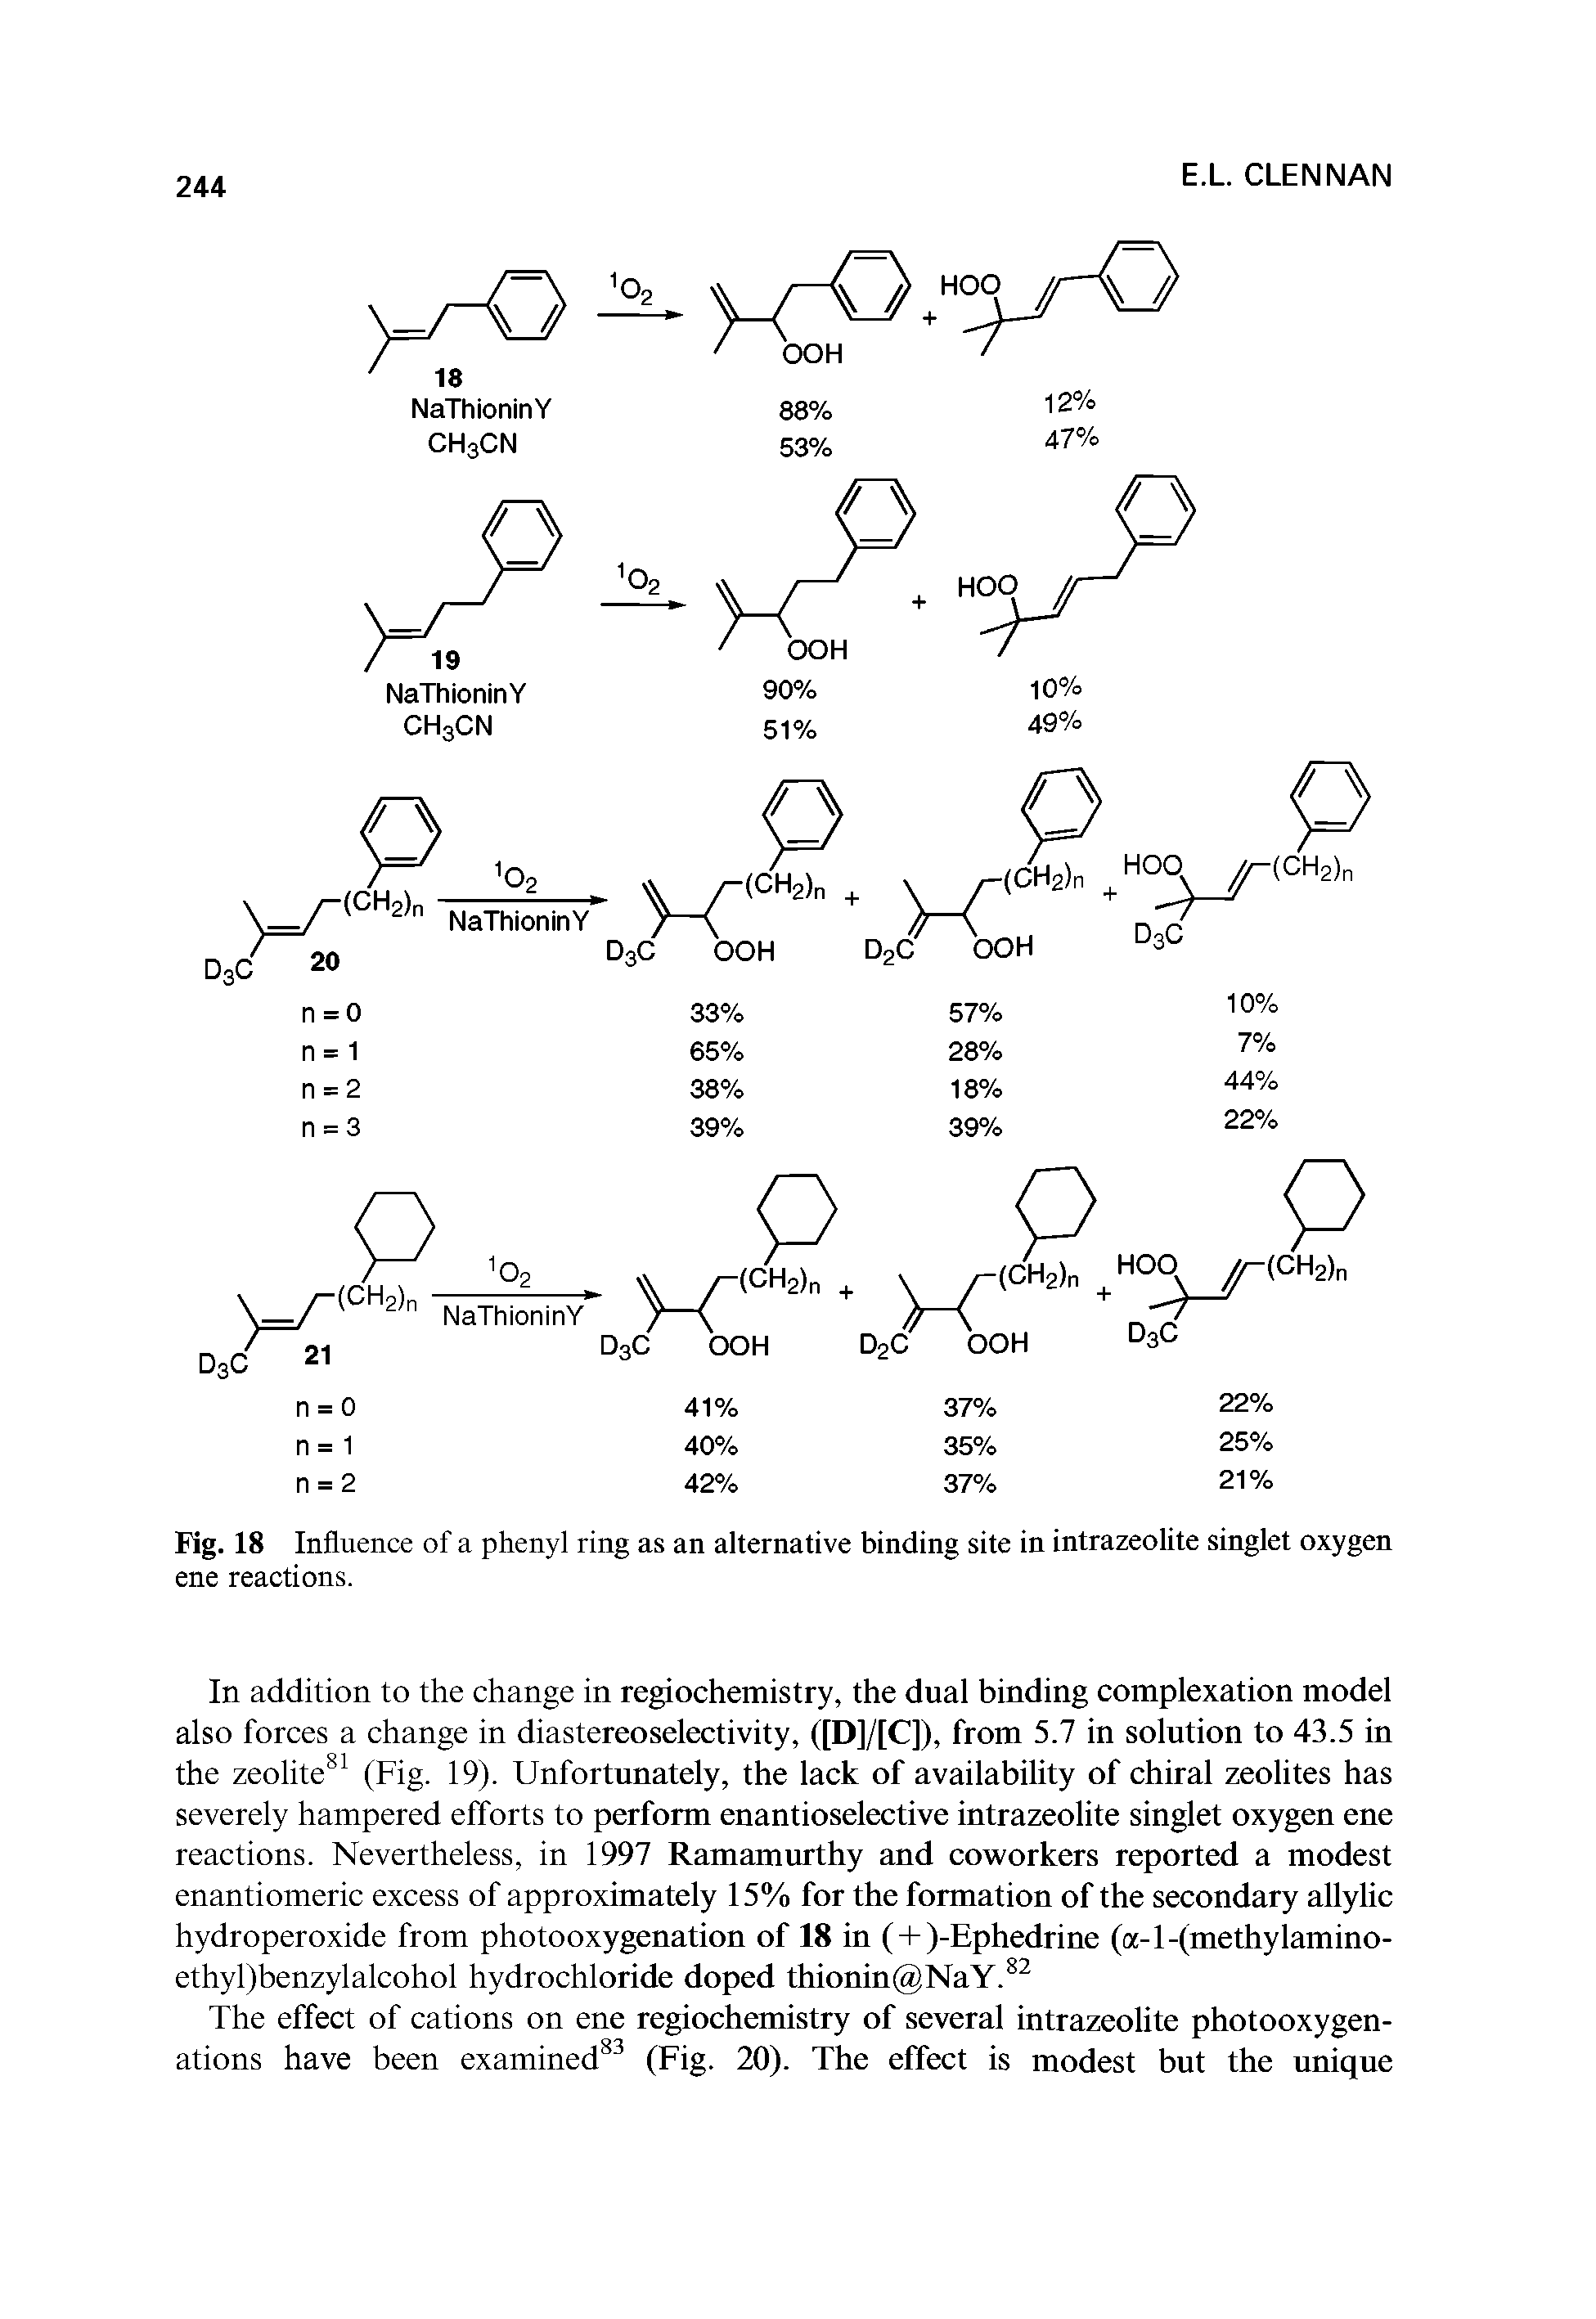 Fig. 18 Influence of a phenyl ring as an alternative binding site in intrazeolite singlet oxygen ene reactions.